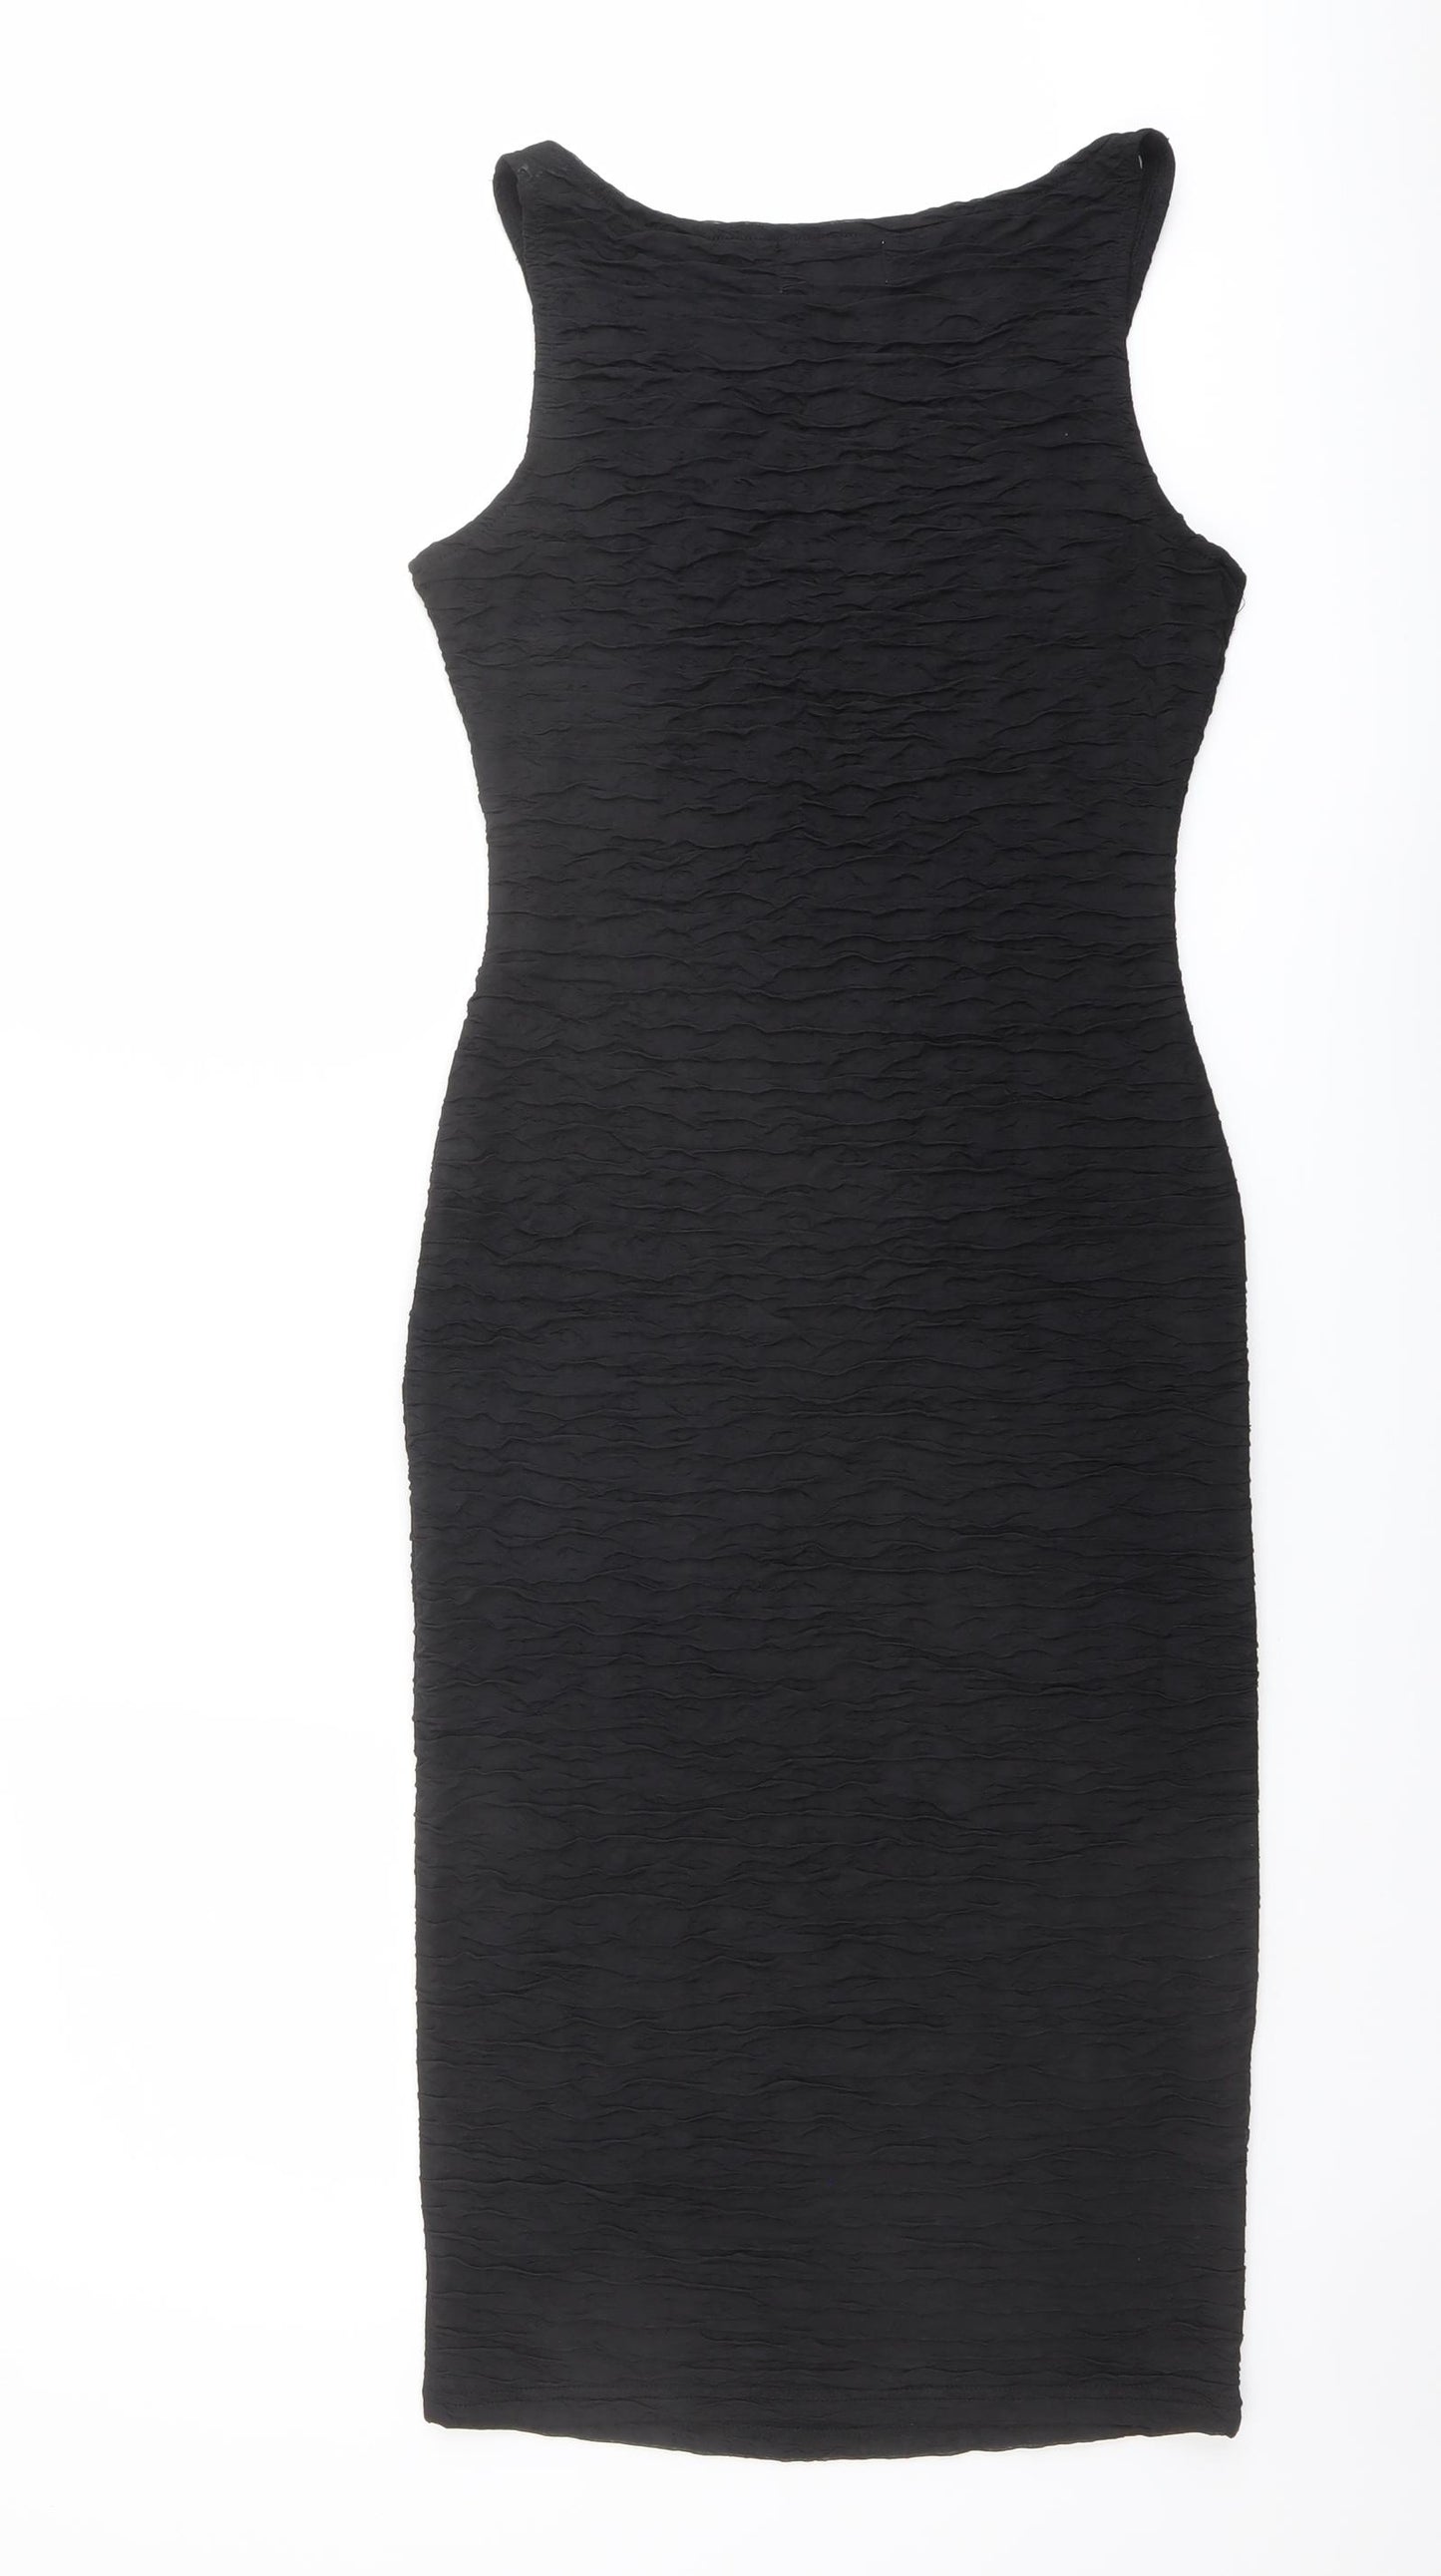 Madam Rage Womens Black Polyester Pencil Dress Size 8 Boat Neck Pullover - Textured